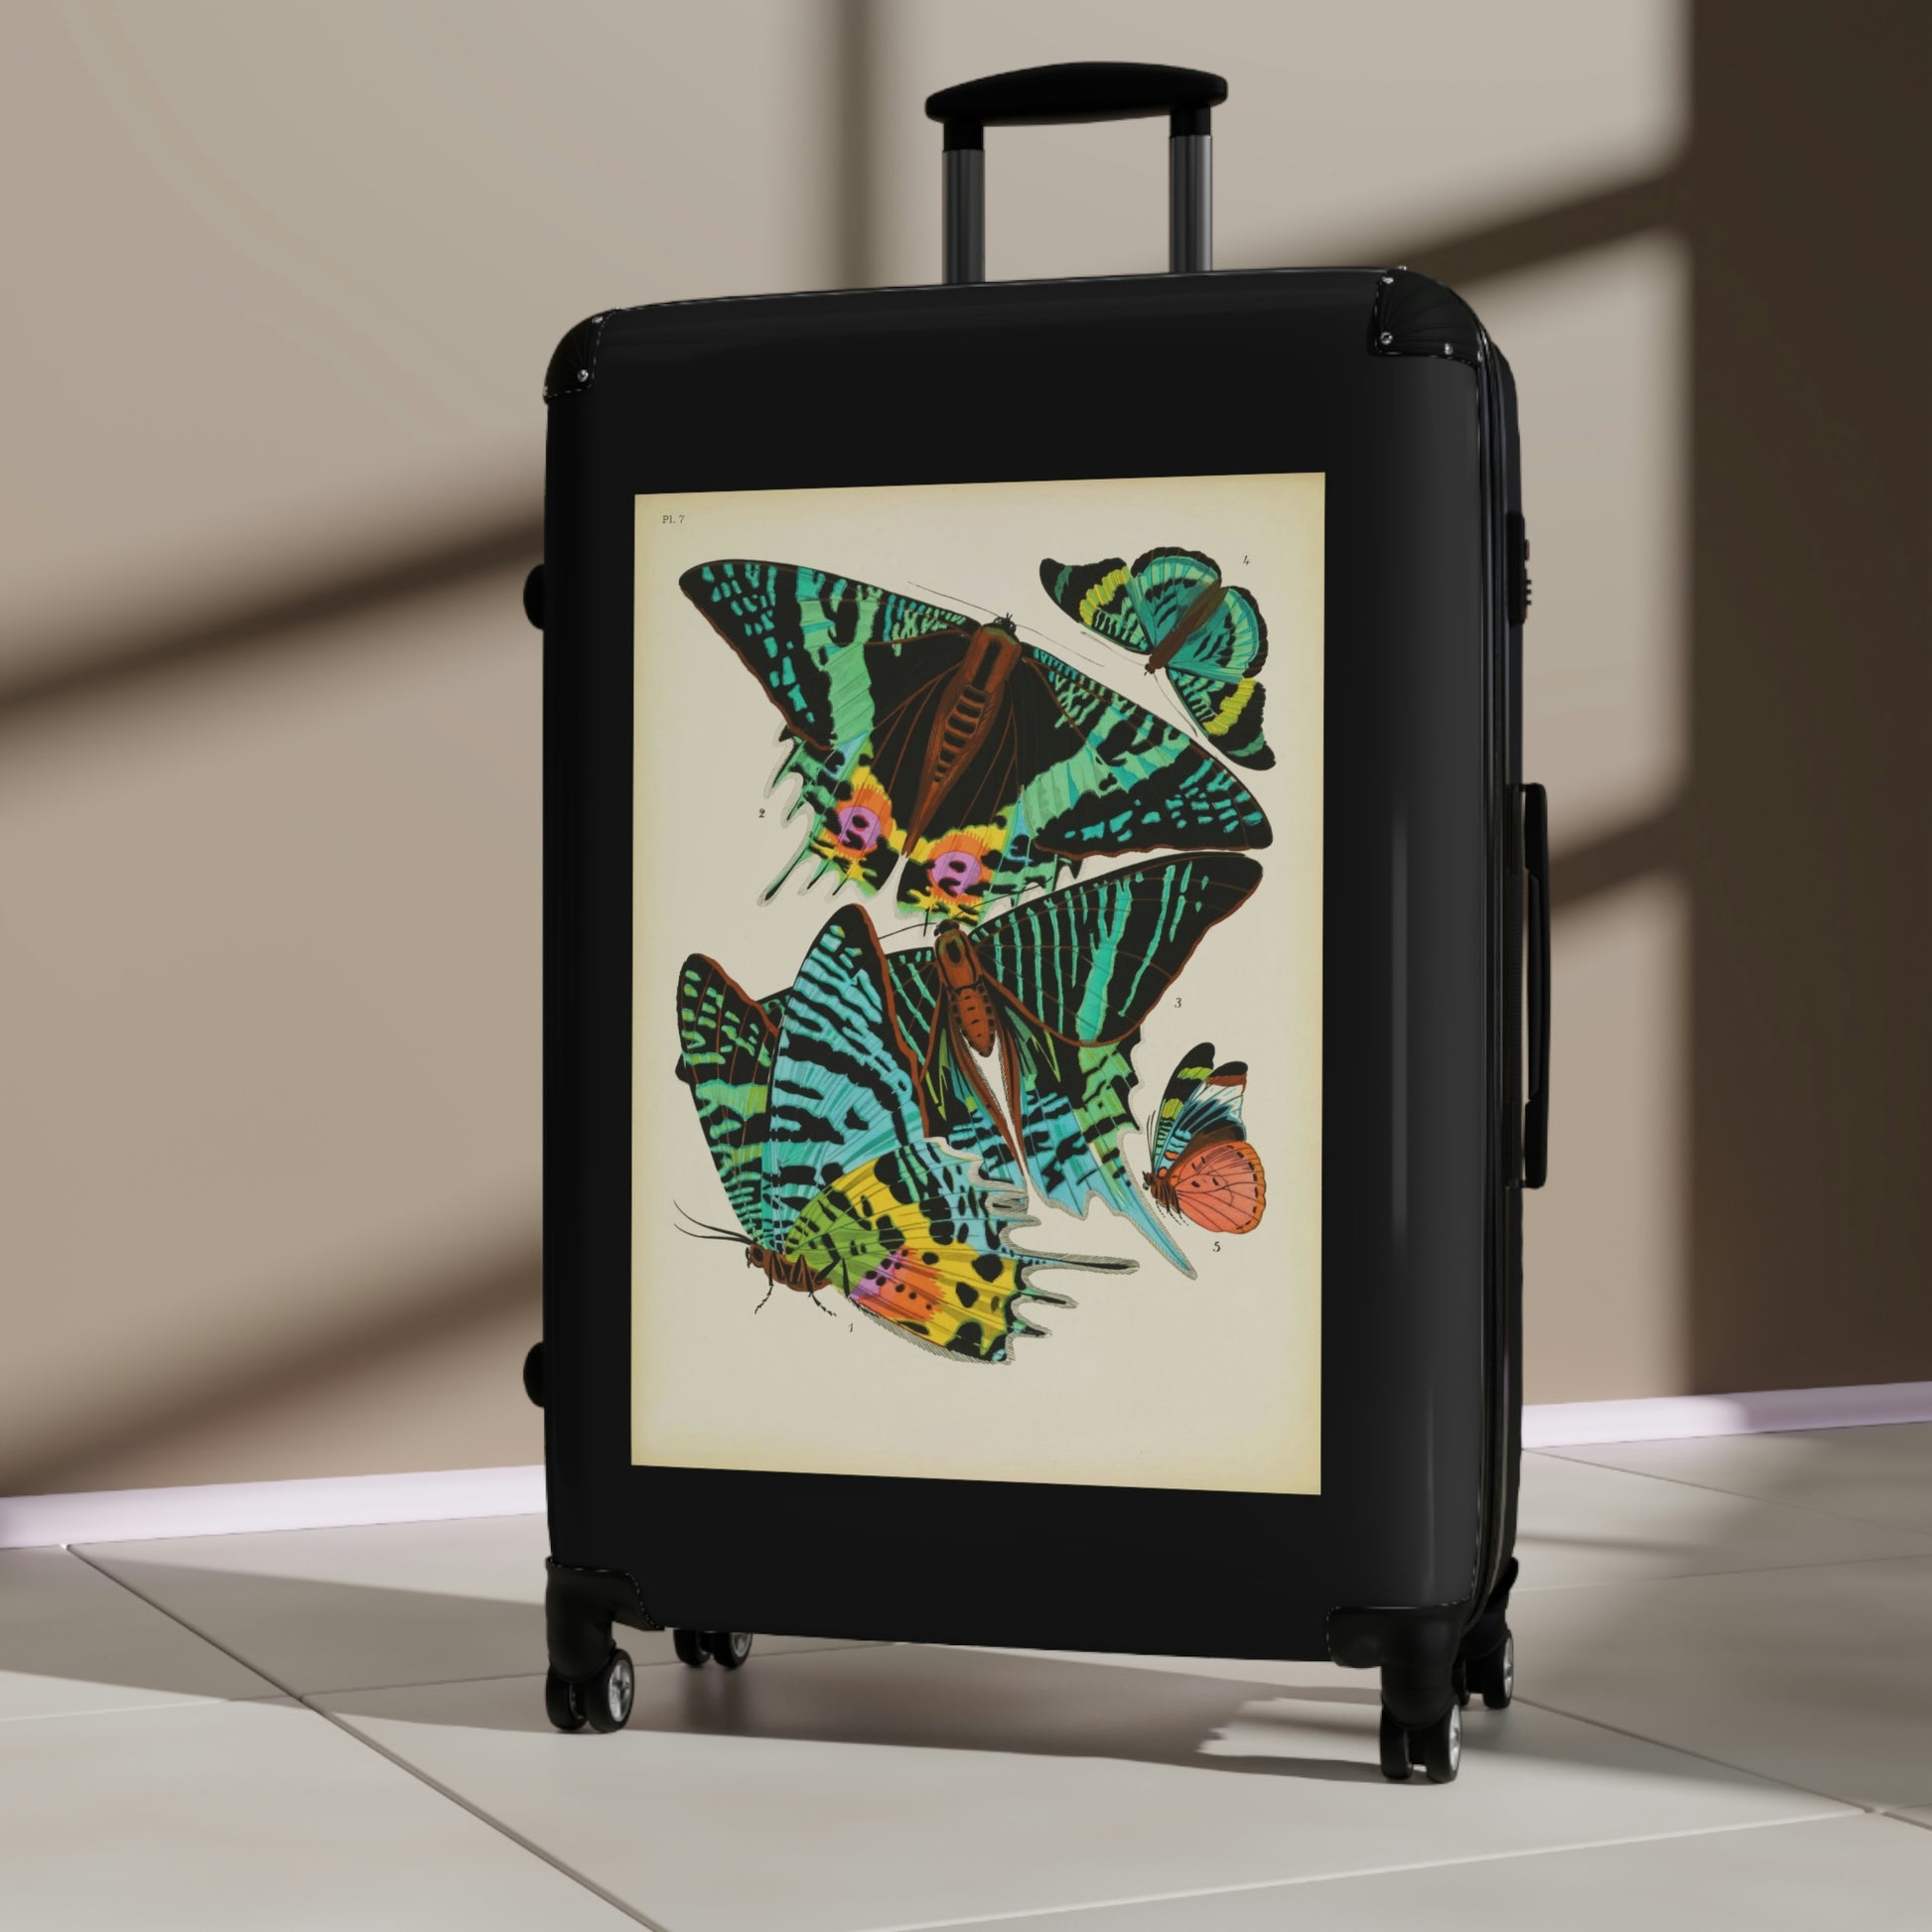 Getrott Butterflies Macrolepidopteran Rhopalocera Lepidoptera Black Red Yellow Cabin Suitcase Rolling Luggage Inner Pockets Extended Storage Adjustable Telescopic Handle Inner Pockets Double wheeled Polycarbonate Hard-shell Built-in Lock